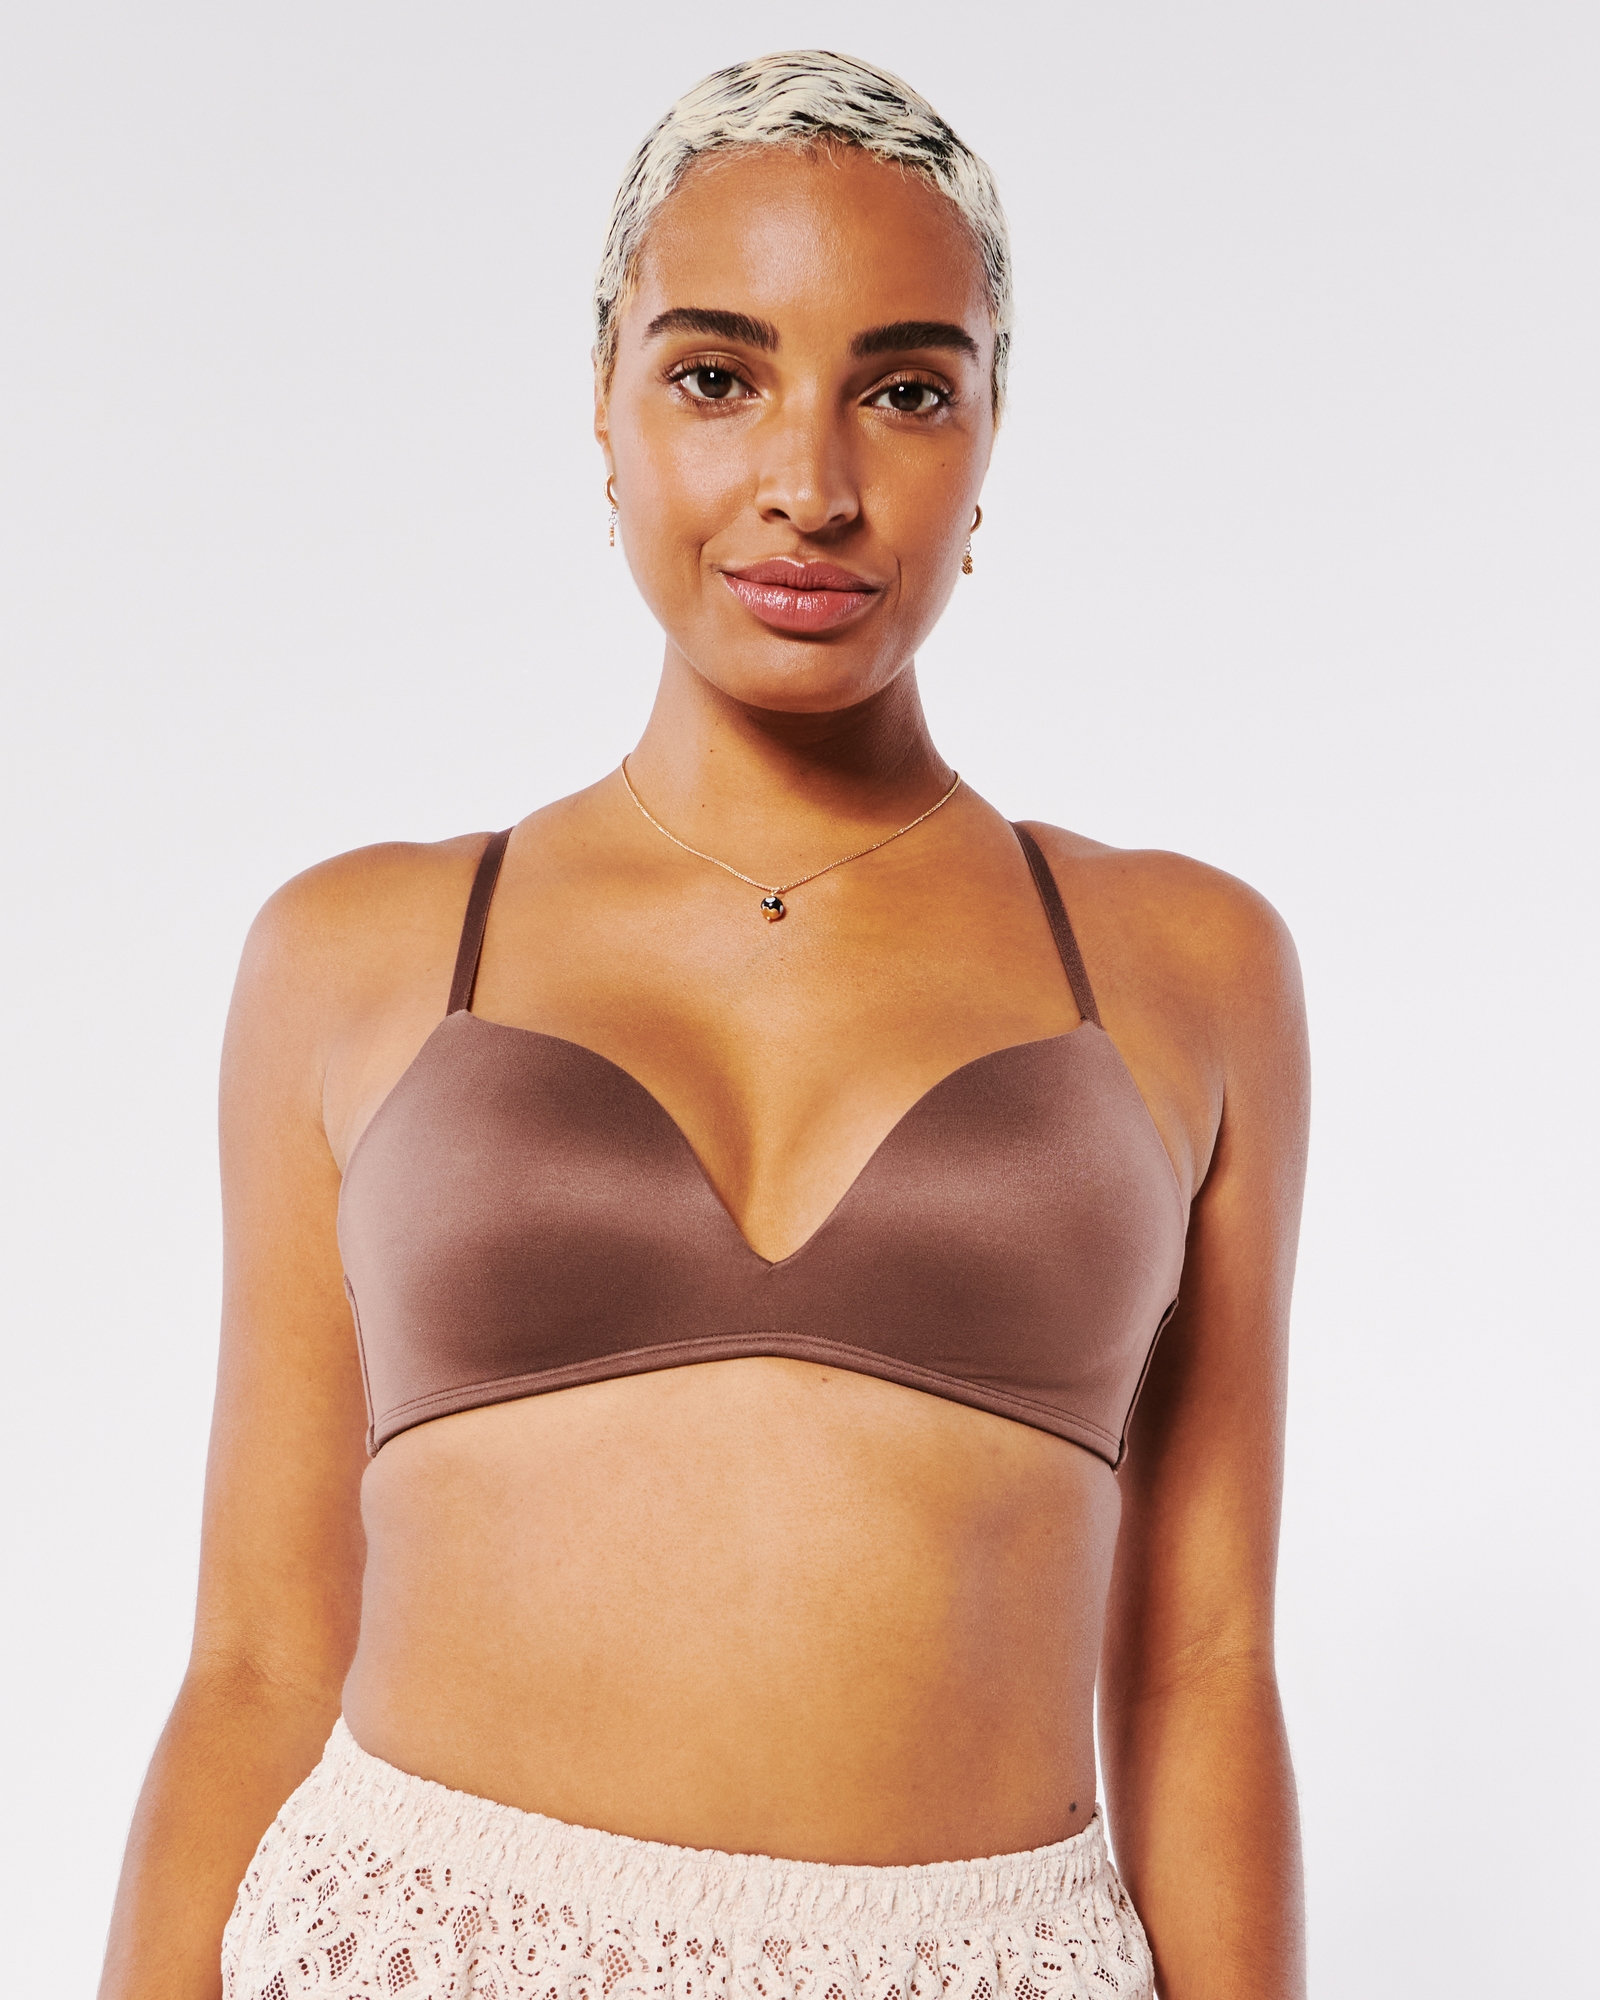 Hollister Gilly Hicks Push Up Bra White Size M - $17 (32% Off Retail) New  With Tags - From Eme